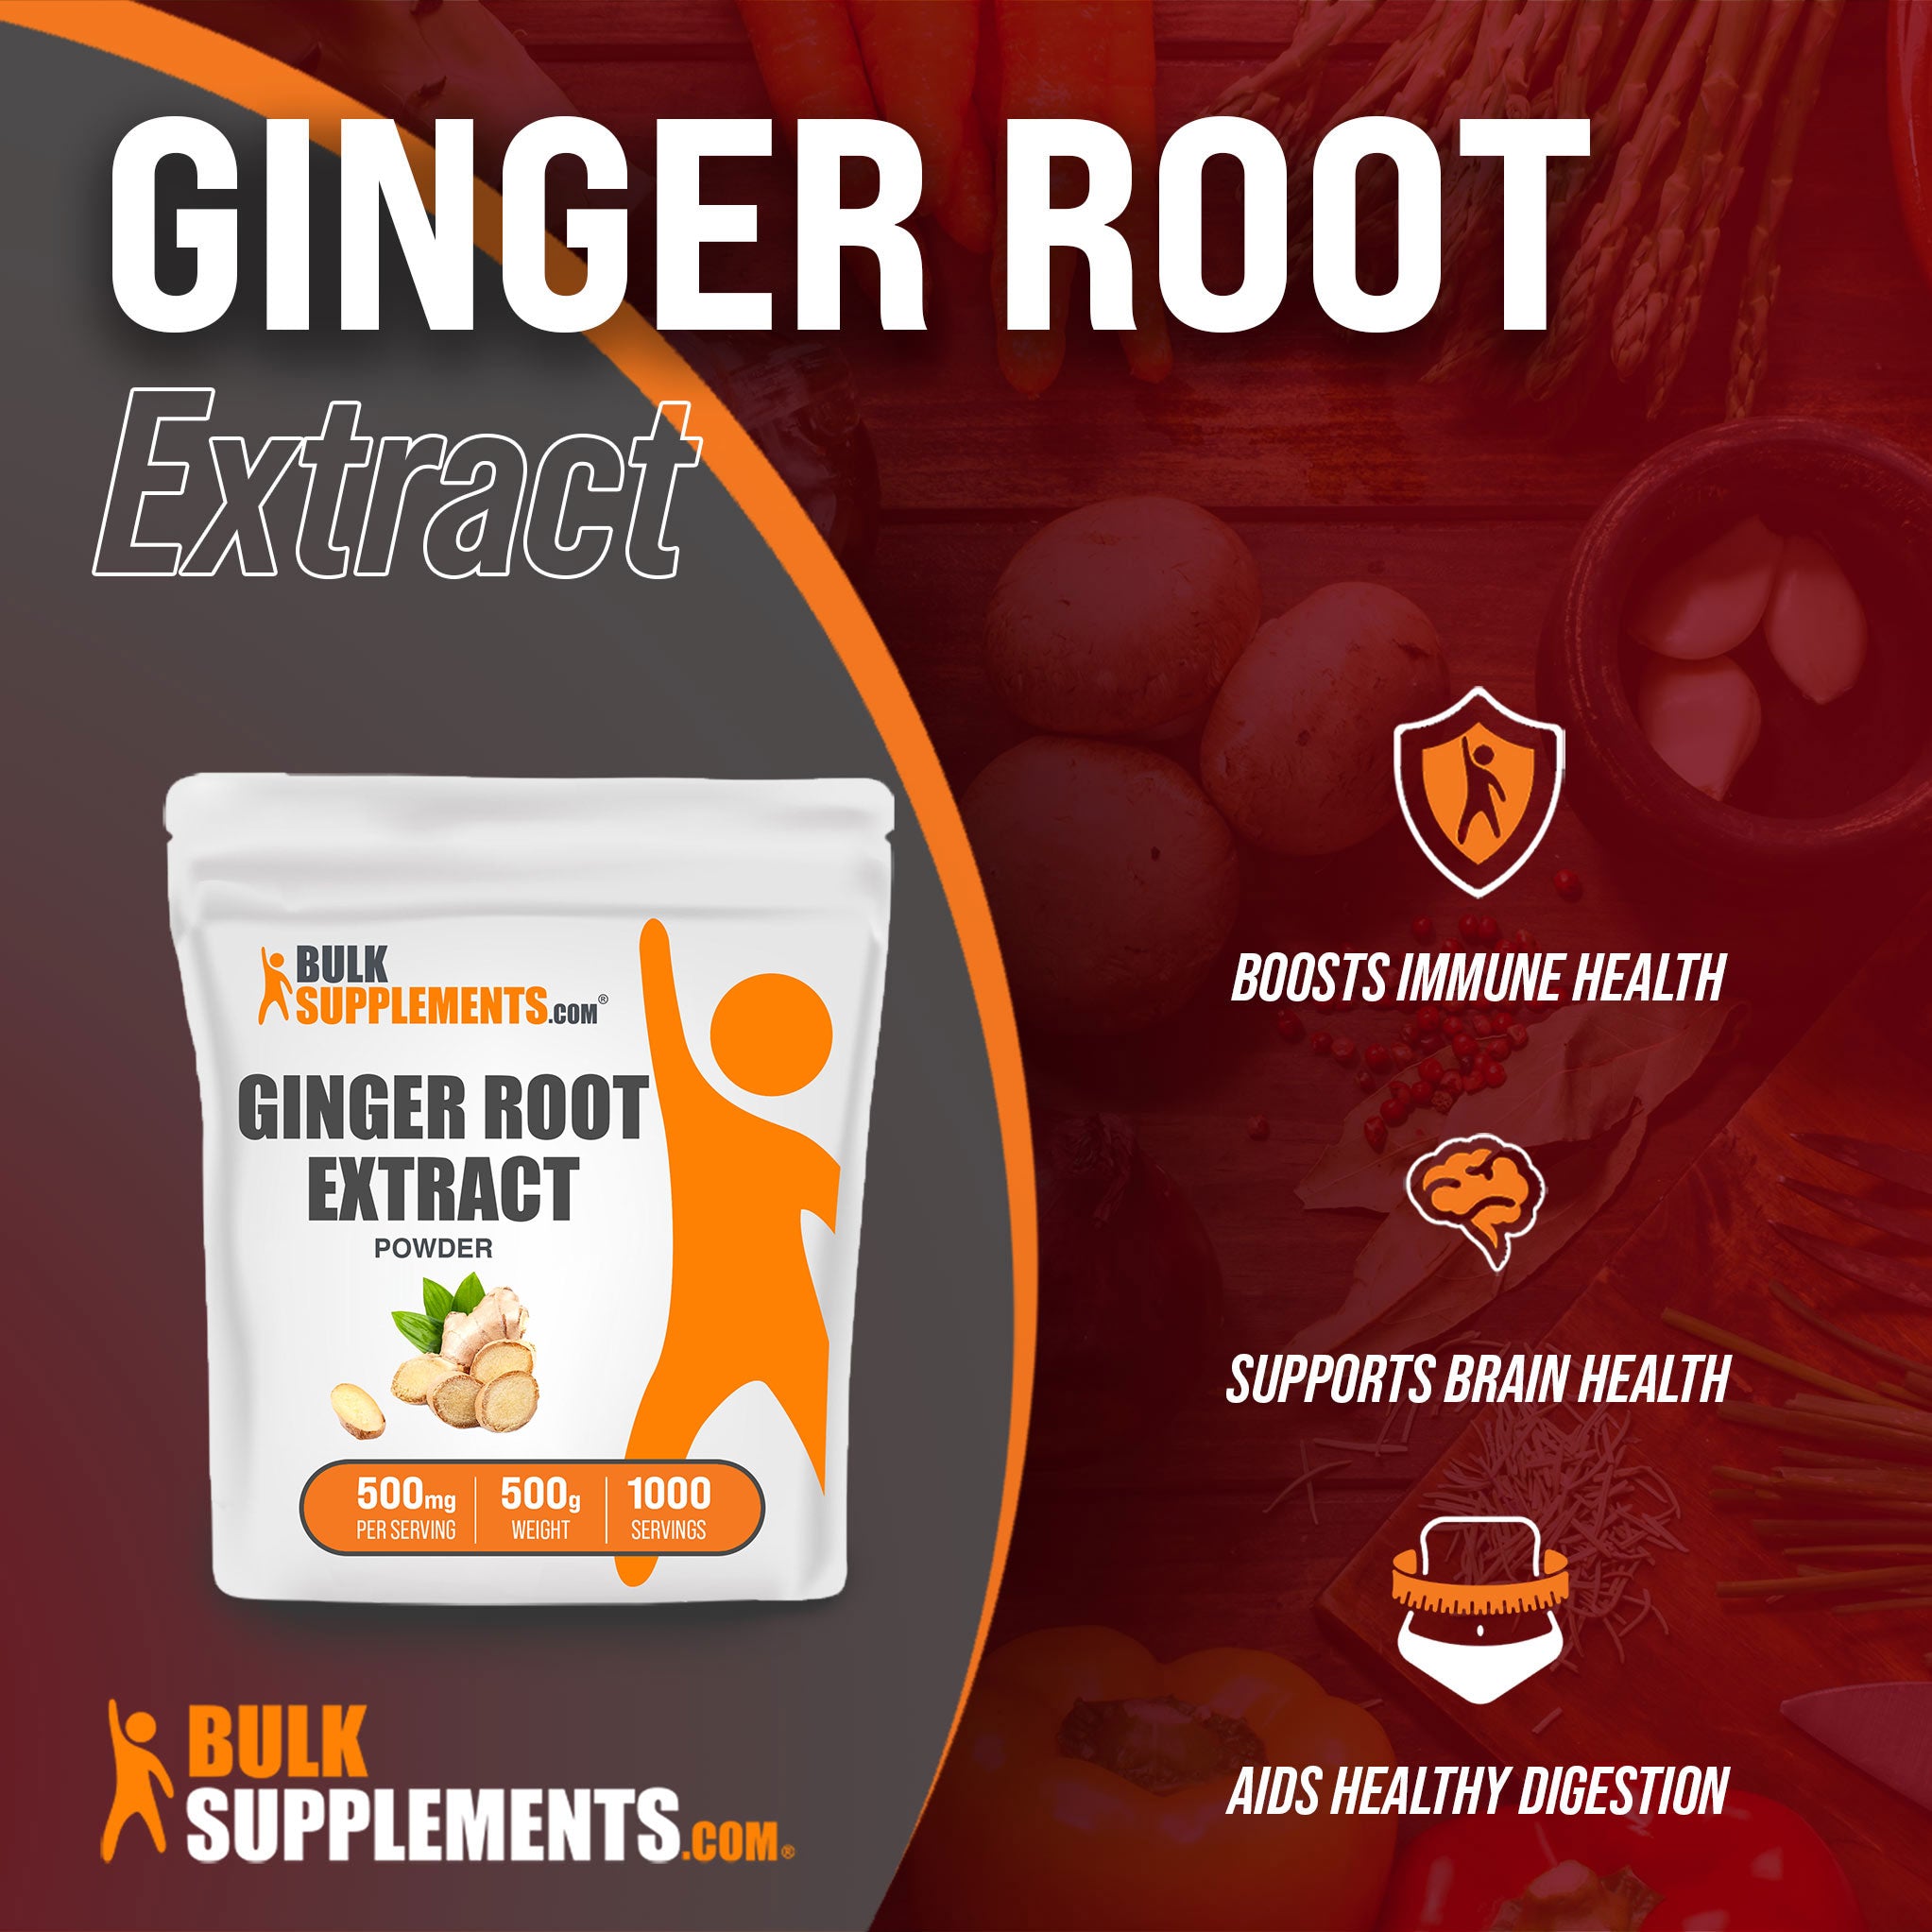 Benefits of Ginger Root Extract; boosts immune health, supports brain health, aids healthy digestion